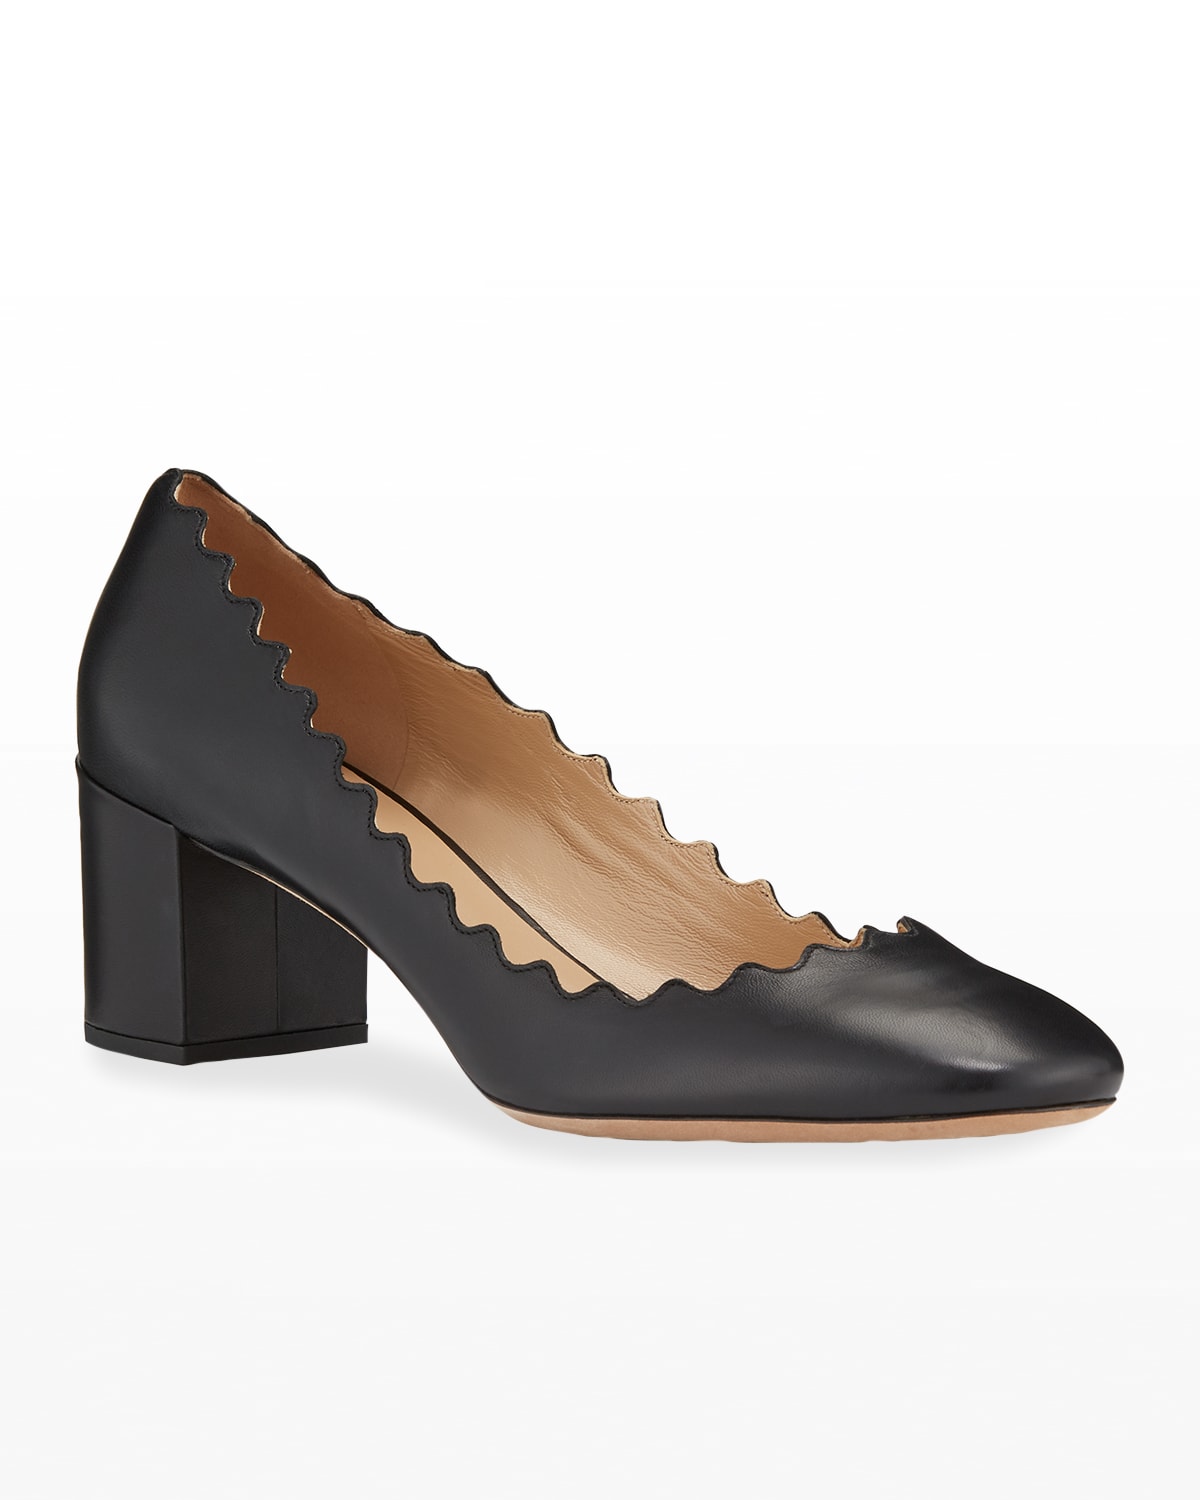 CHLOÉ SCALLOPED LEATHER PUMPS